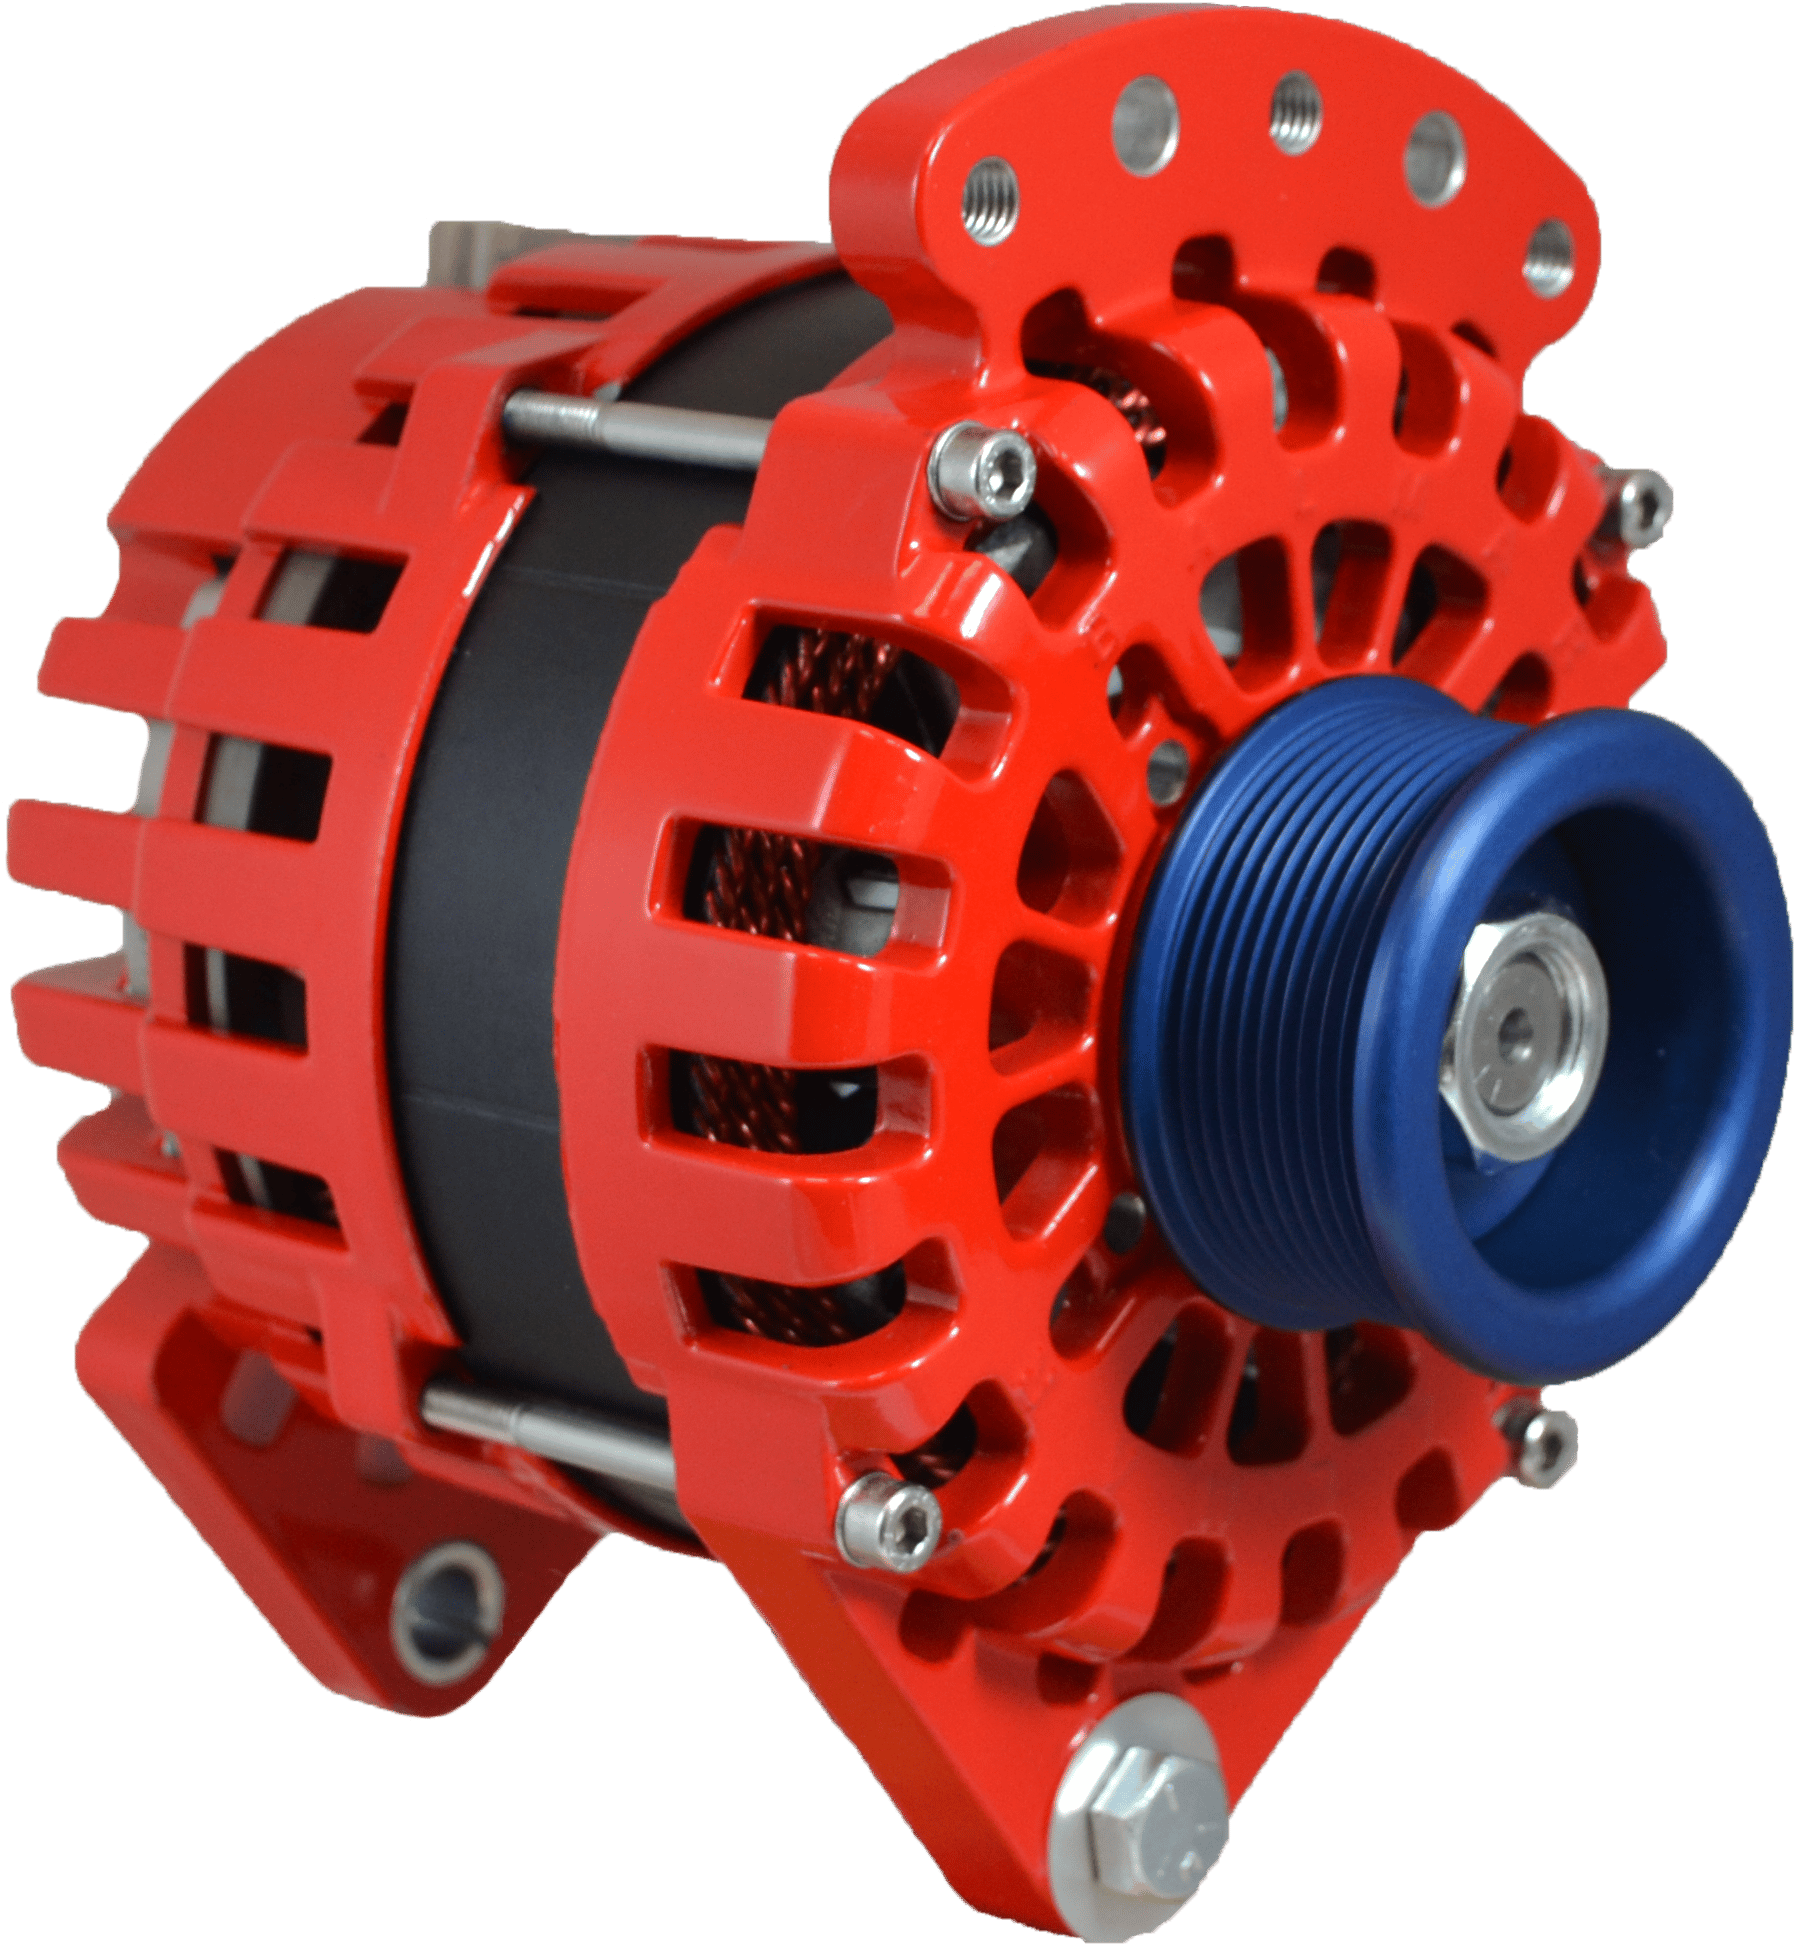 Does the Balmar XT-DF-170-J10 dual foot alternator come with an isolated ground?